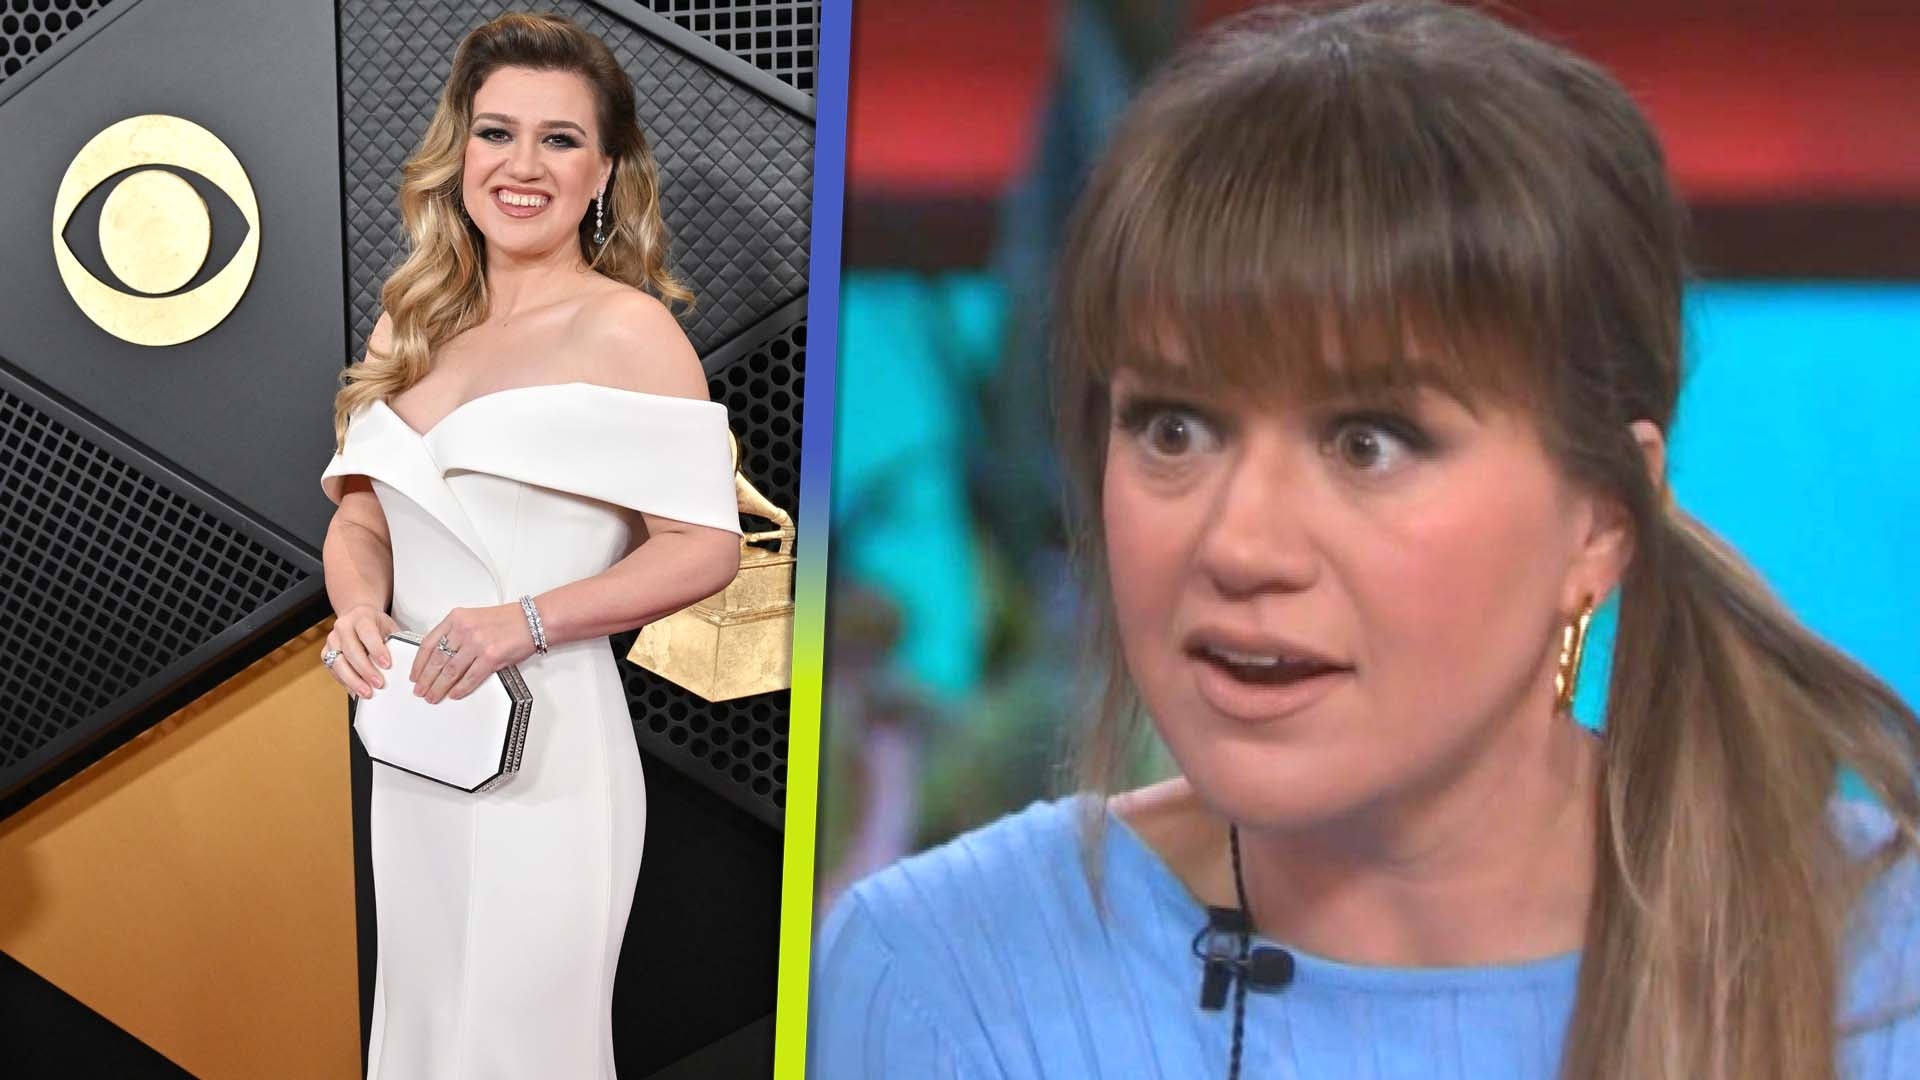 Kelly Clarkson Reveals She Used Weight-Loss Shots After Weighing Over 200 Pounds